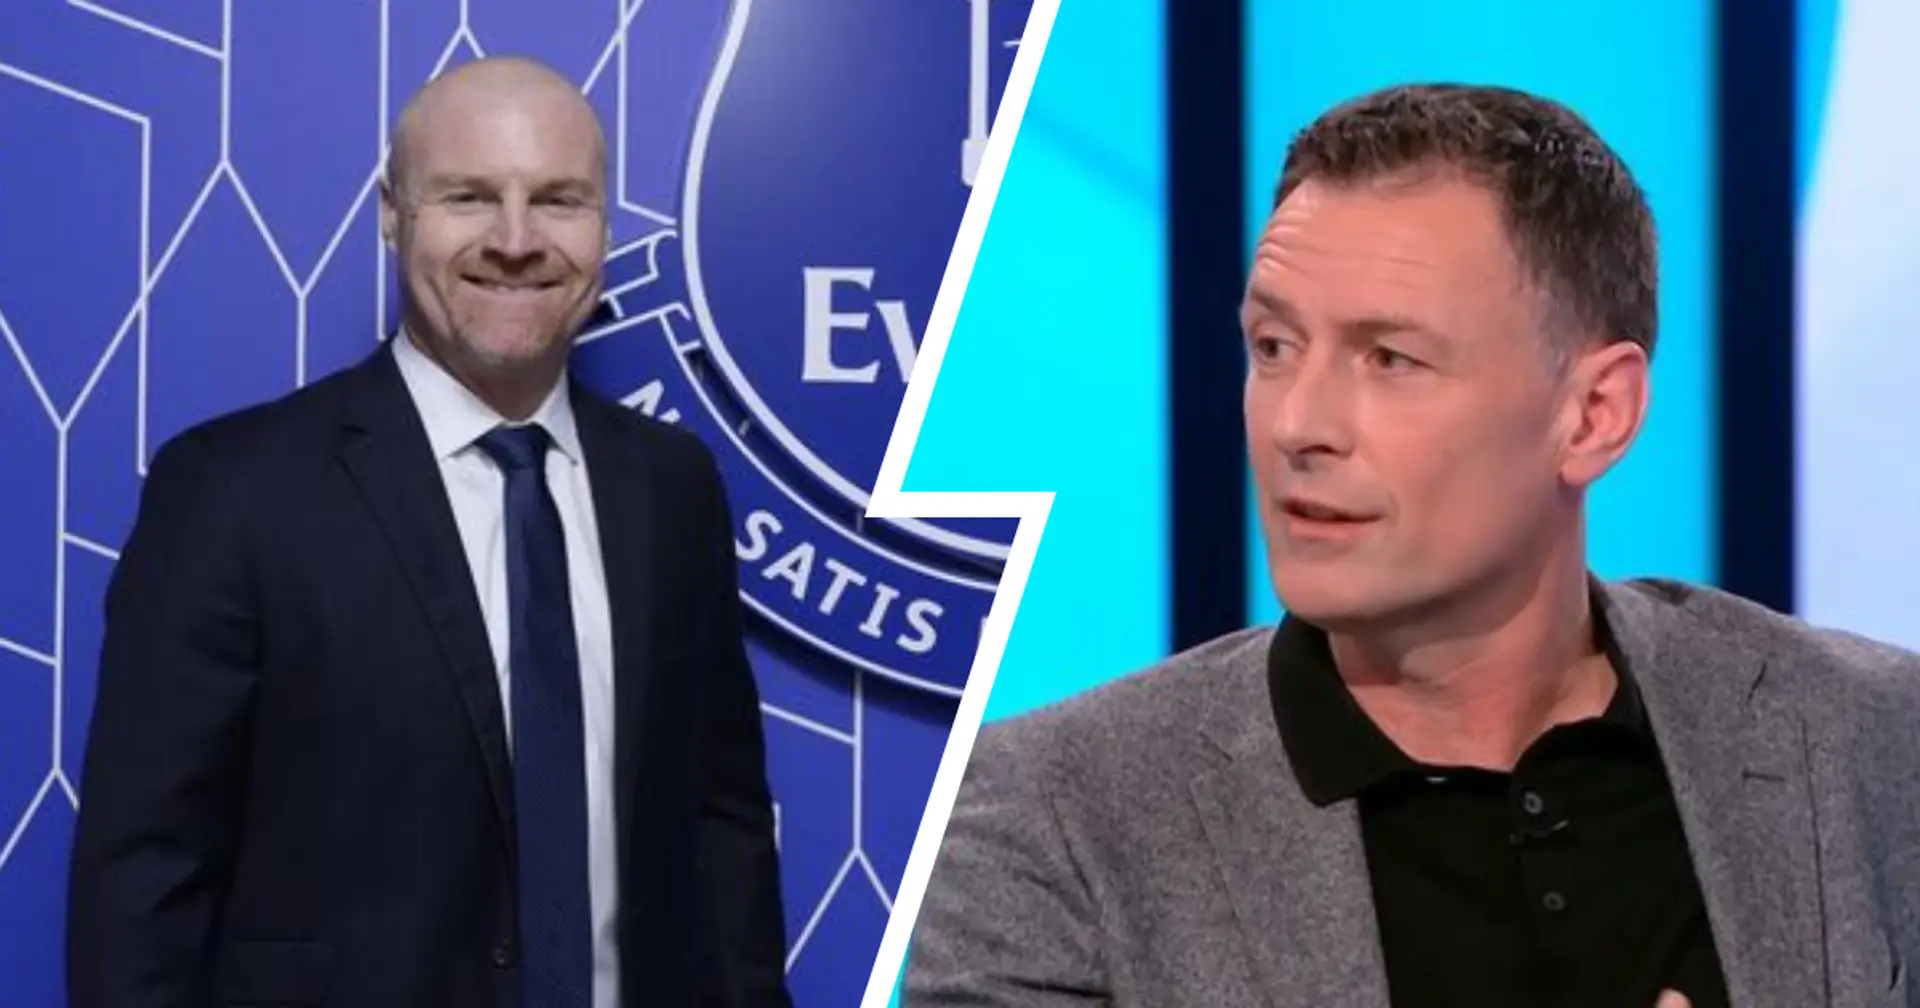 'Everton carry more of a threat now': Chris Sutton makes predictions ahead of Saturday's Old Trafford clash 